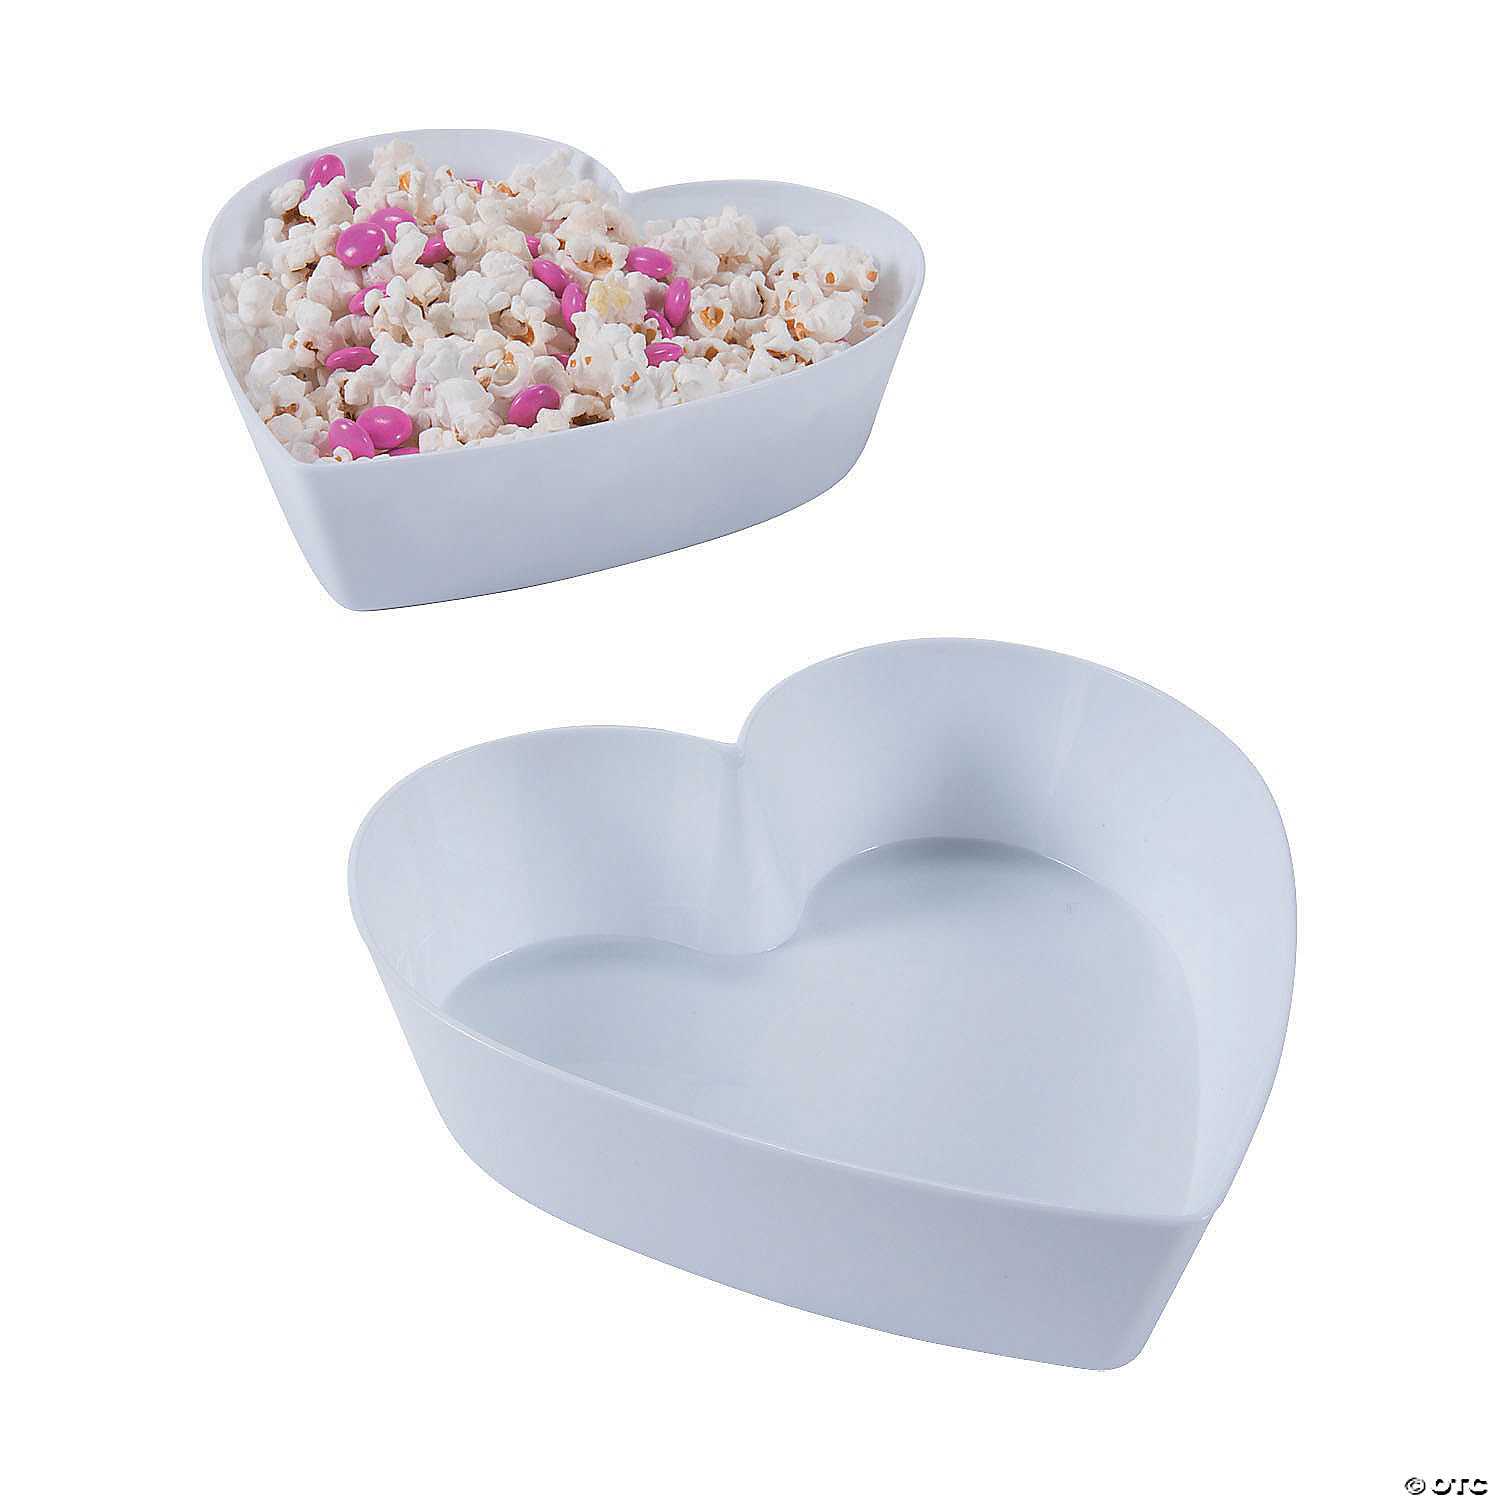 Details about   Valentine's Day Hearts Large 14" Round Plastic Snack Serving Bowl Tray Set of 4